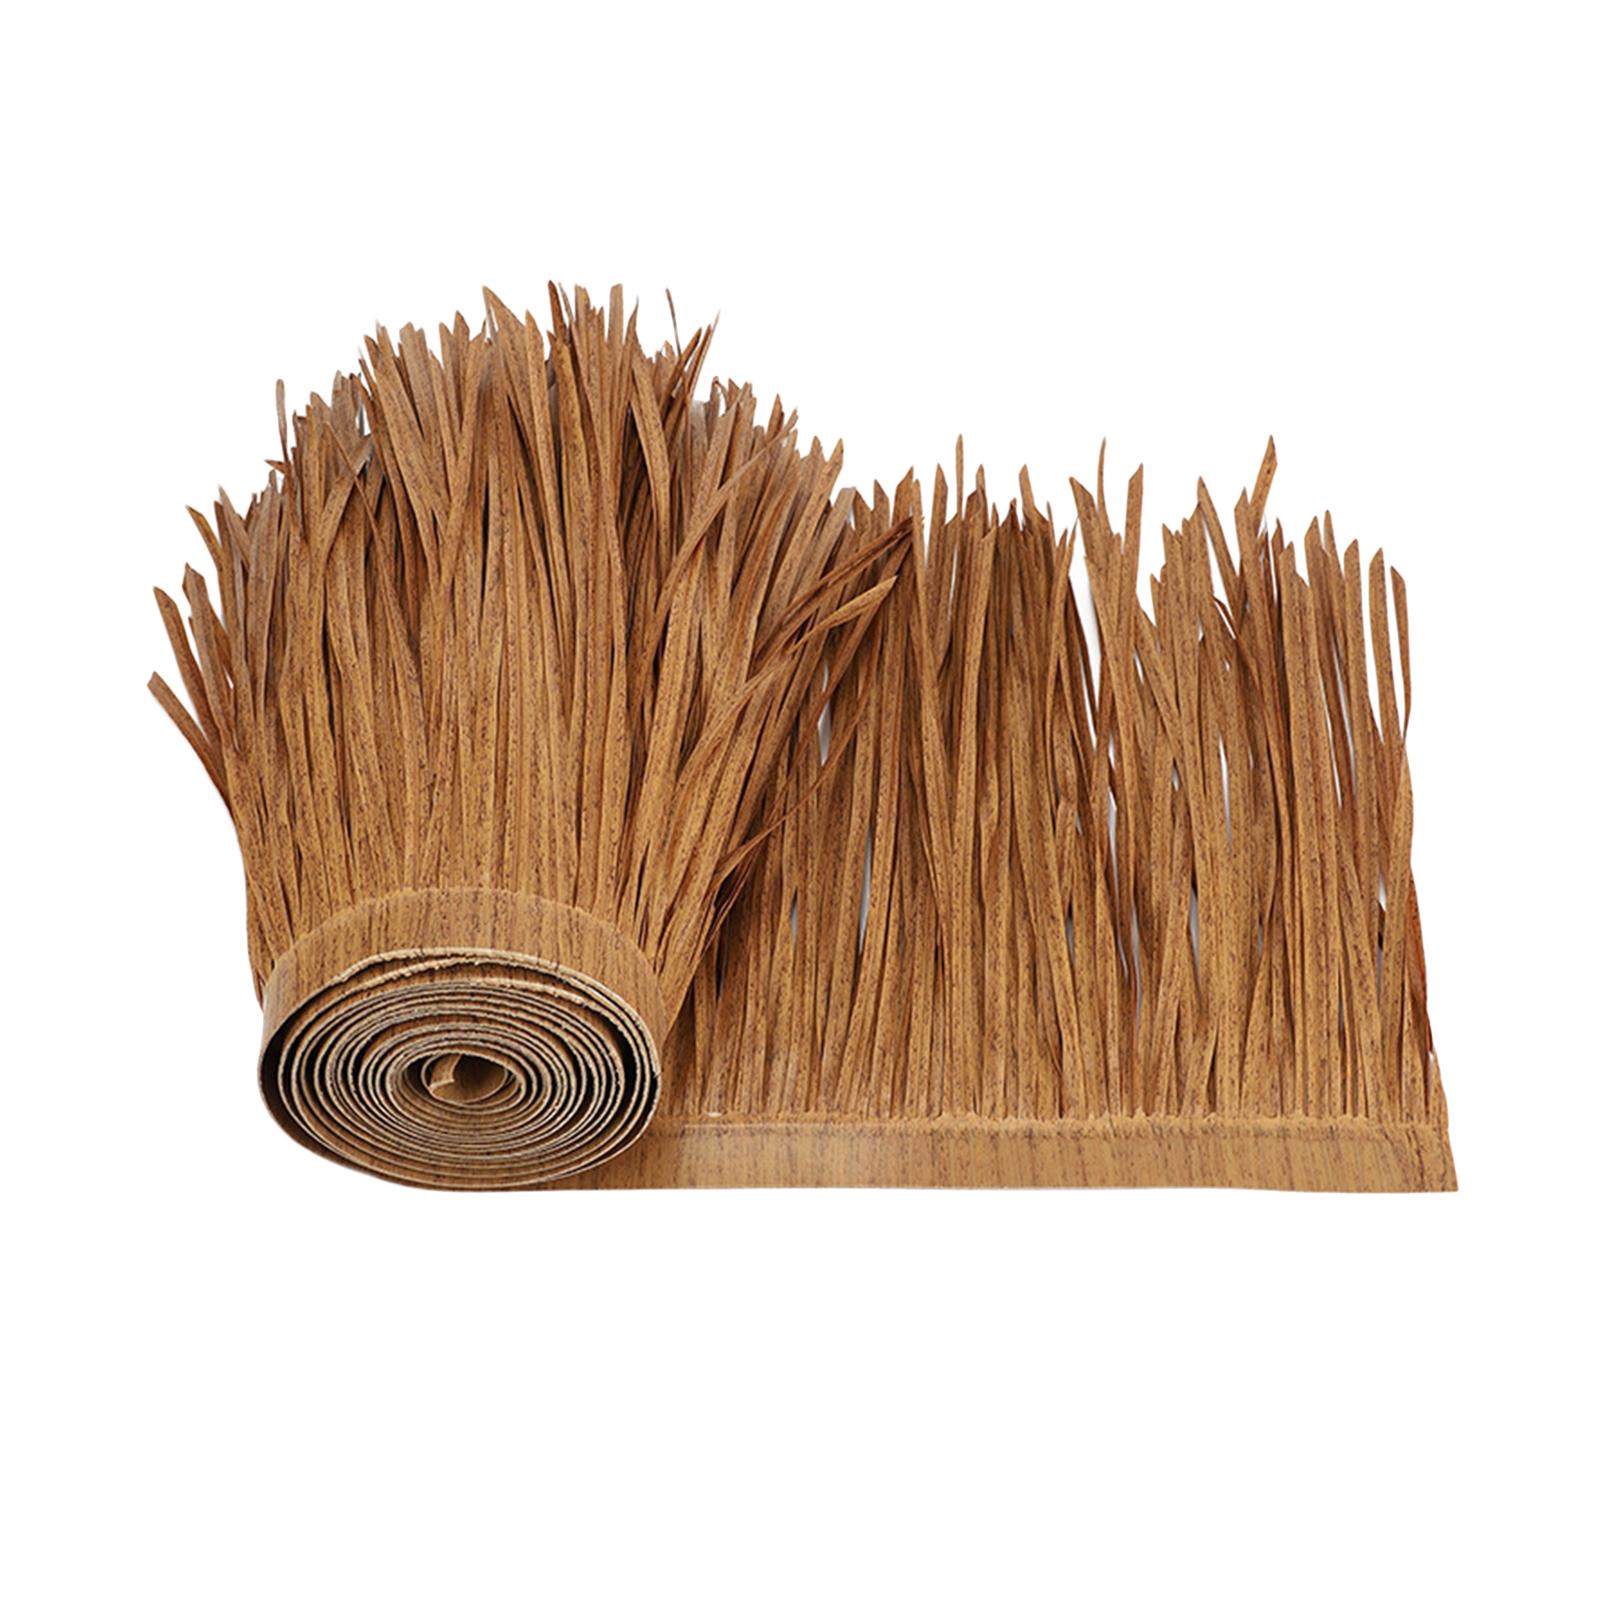 FOMIYES 4pcs Thatch Tile Fake Straw Roof Tiki Hut Thatch Patio Sunshade  Roof Mexican Straw Roof Lifelike Straw Roof Blind Grass Tiki Bar Grass Fake